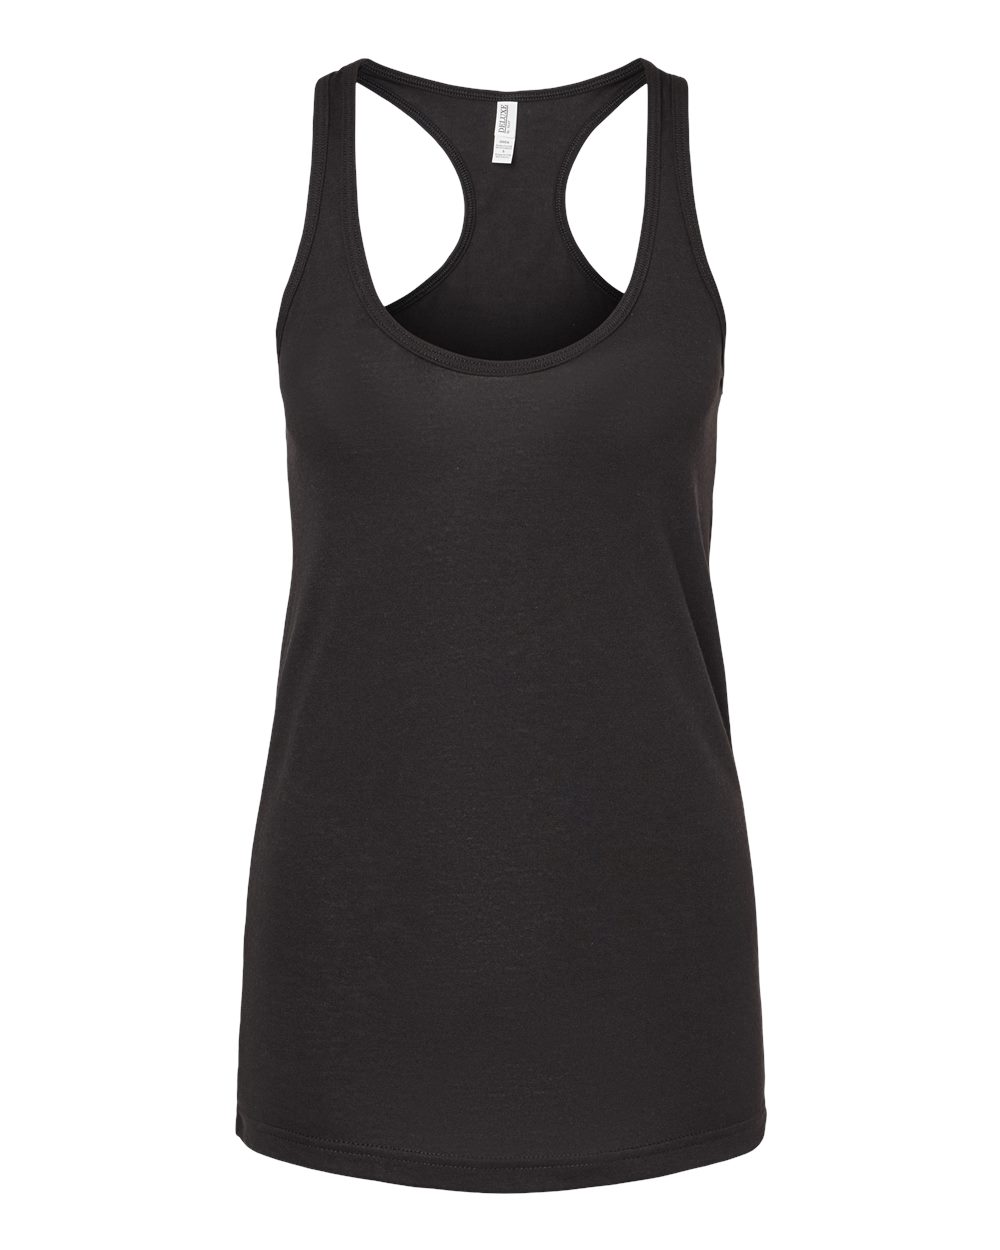 Teejoy Women's Seamless Polyester Racerback Tank Top - Black, One size at   Women's Clothing store